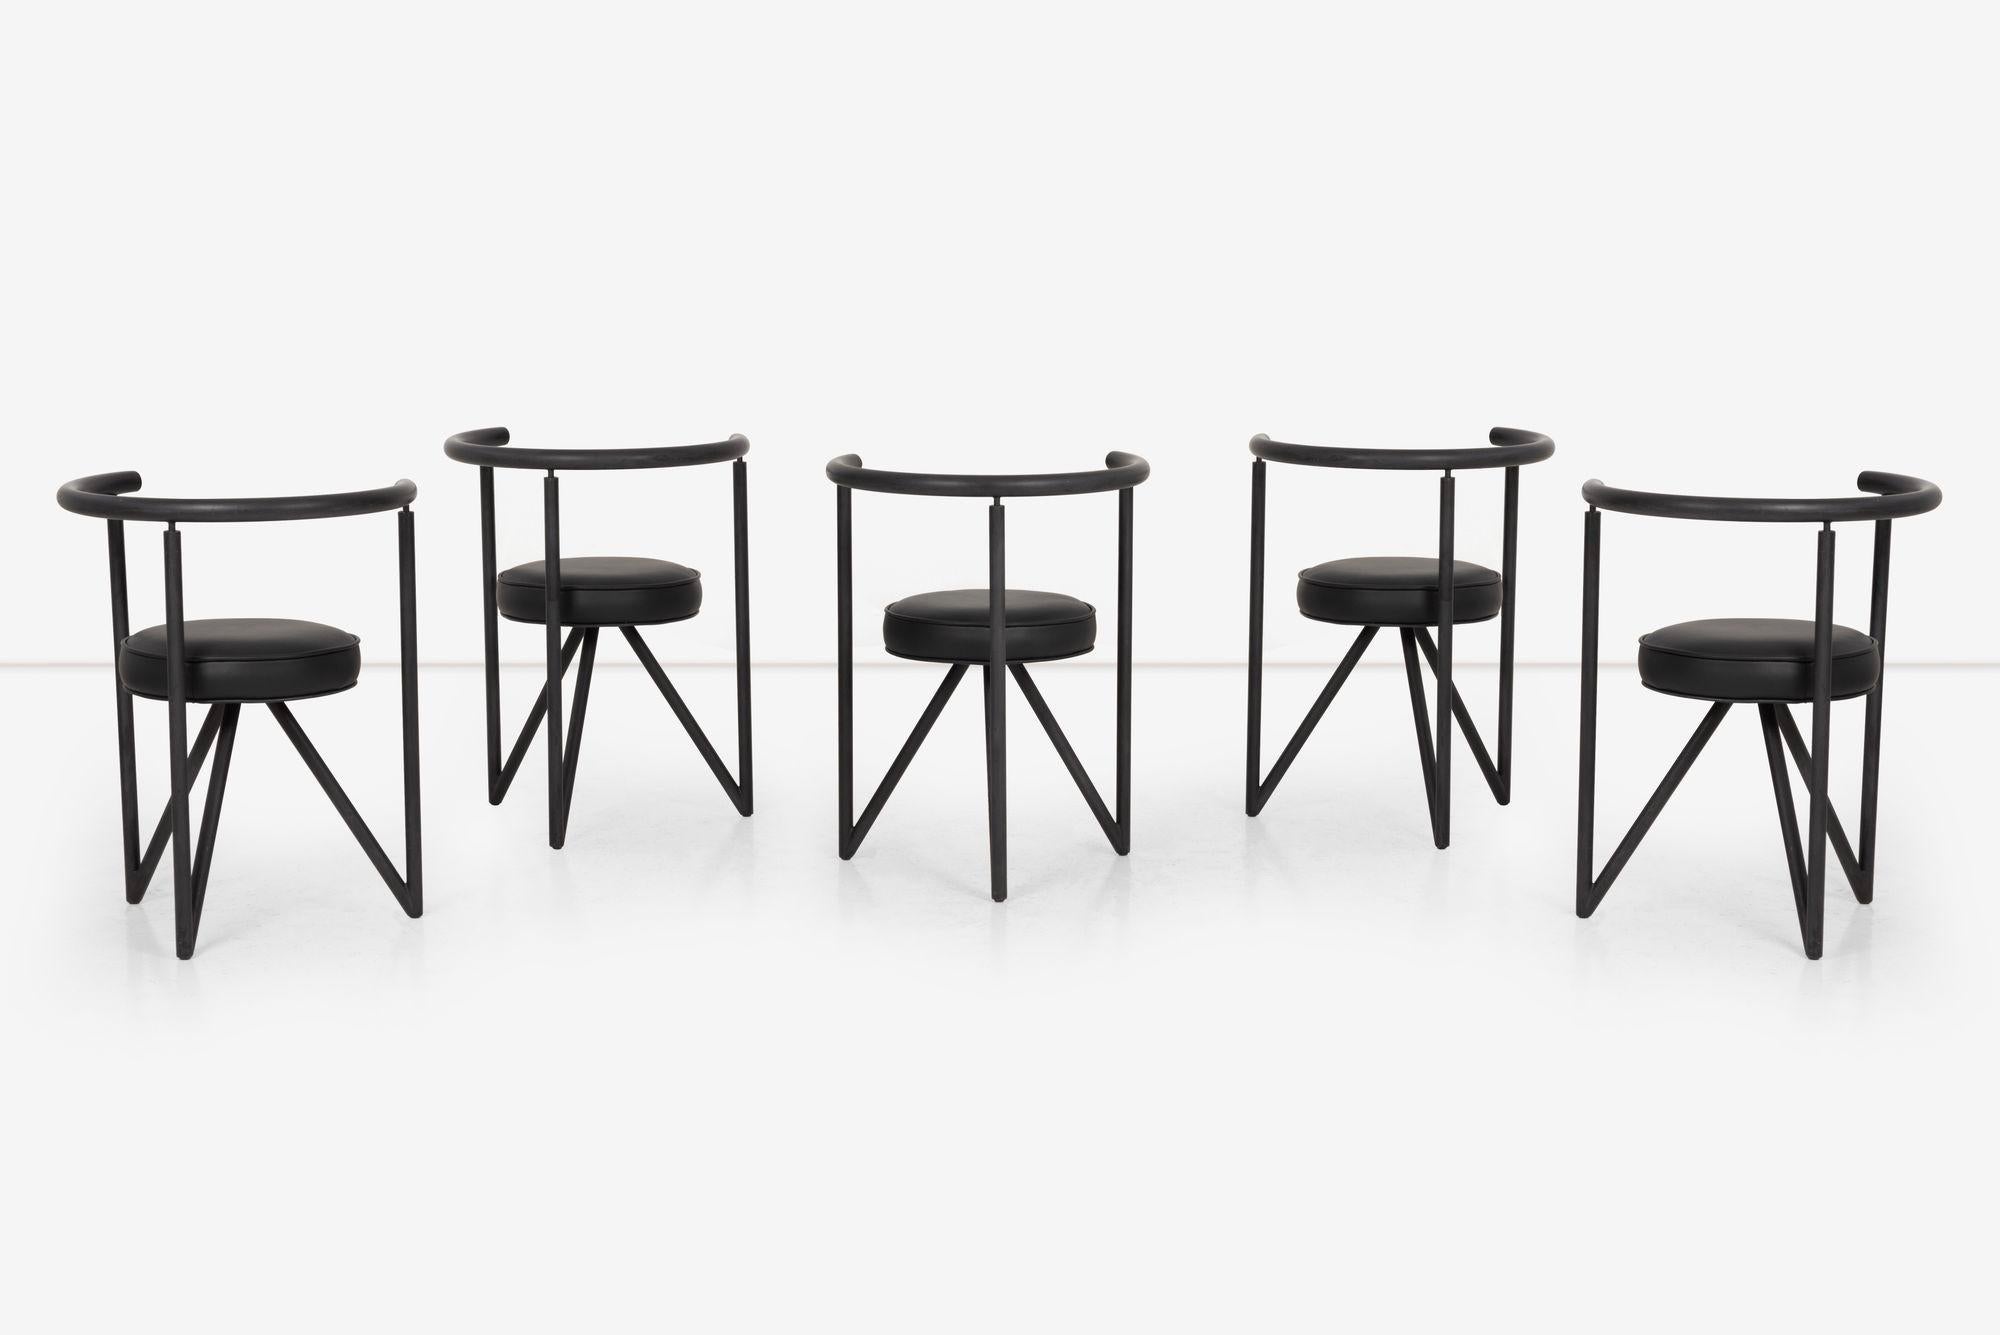 Late 20th Century Philippe Starck Miss Dorn Chairs, set of Five by Disform, Spain 1982